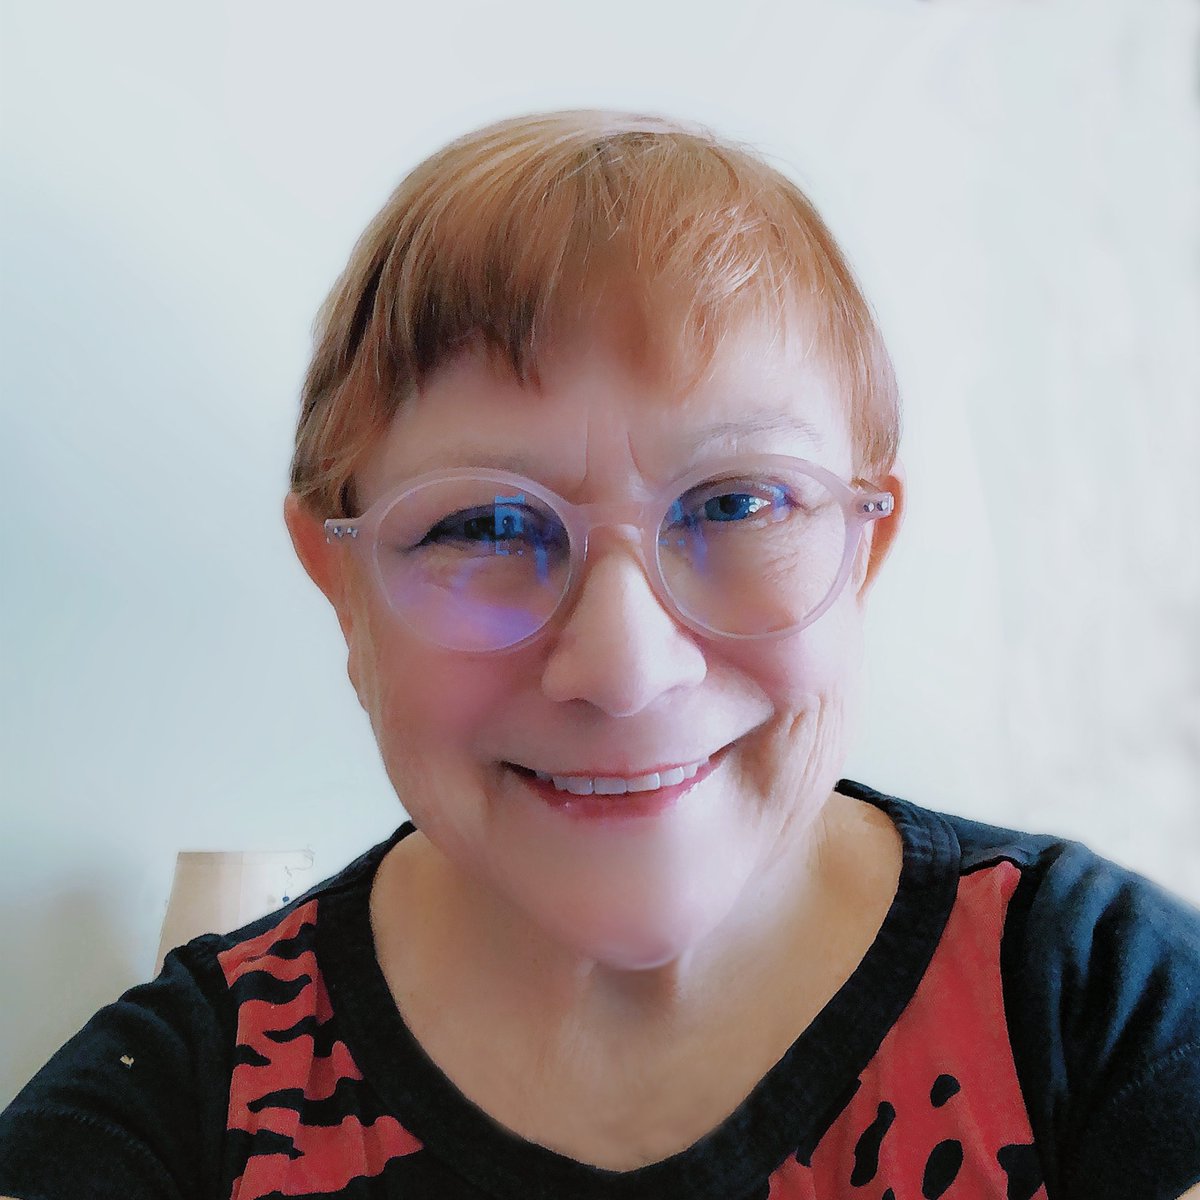 3-4pm PDT today (5/26)"The Once and Future Artistic Legacies of Virtual Realties" from JACKI MORIE  @skydeas1 https://meetings.ringcentral.com/j/1480454537 